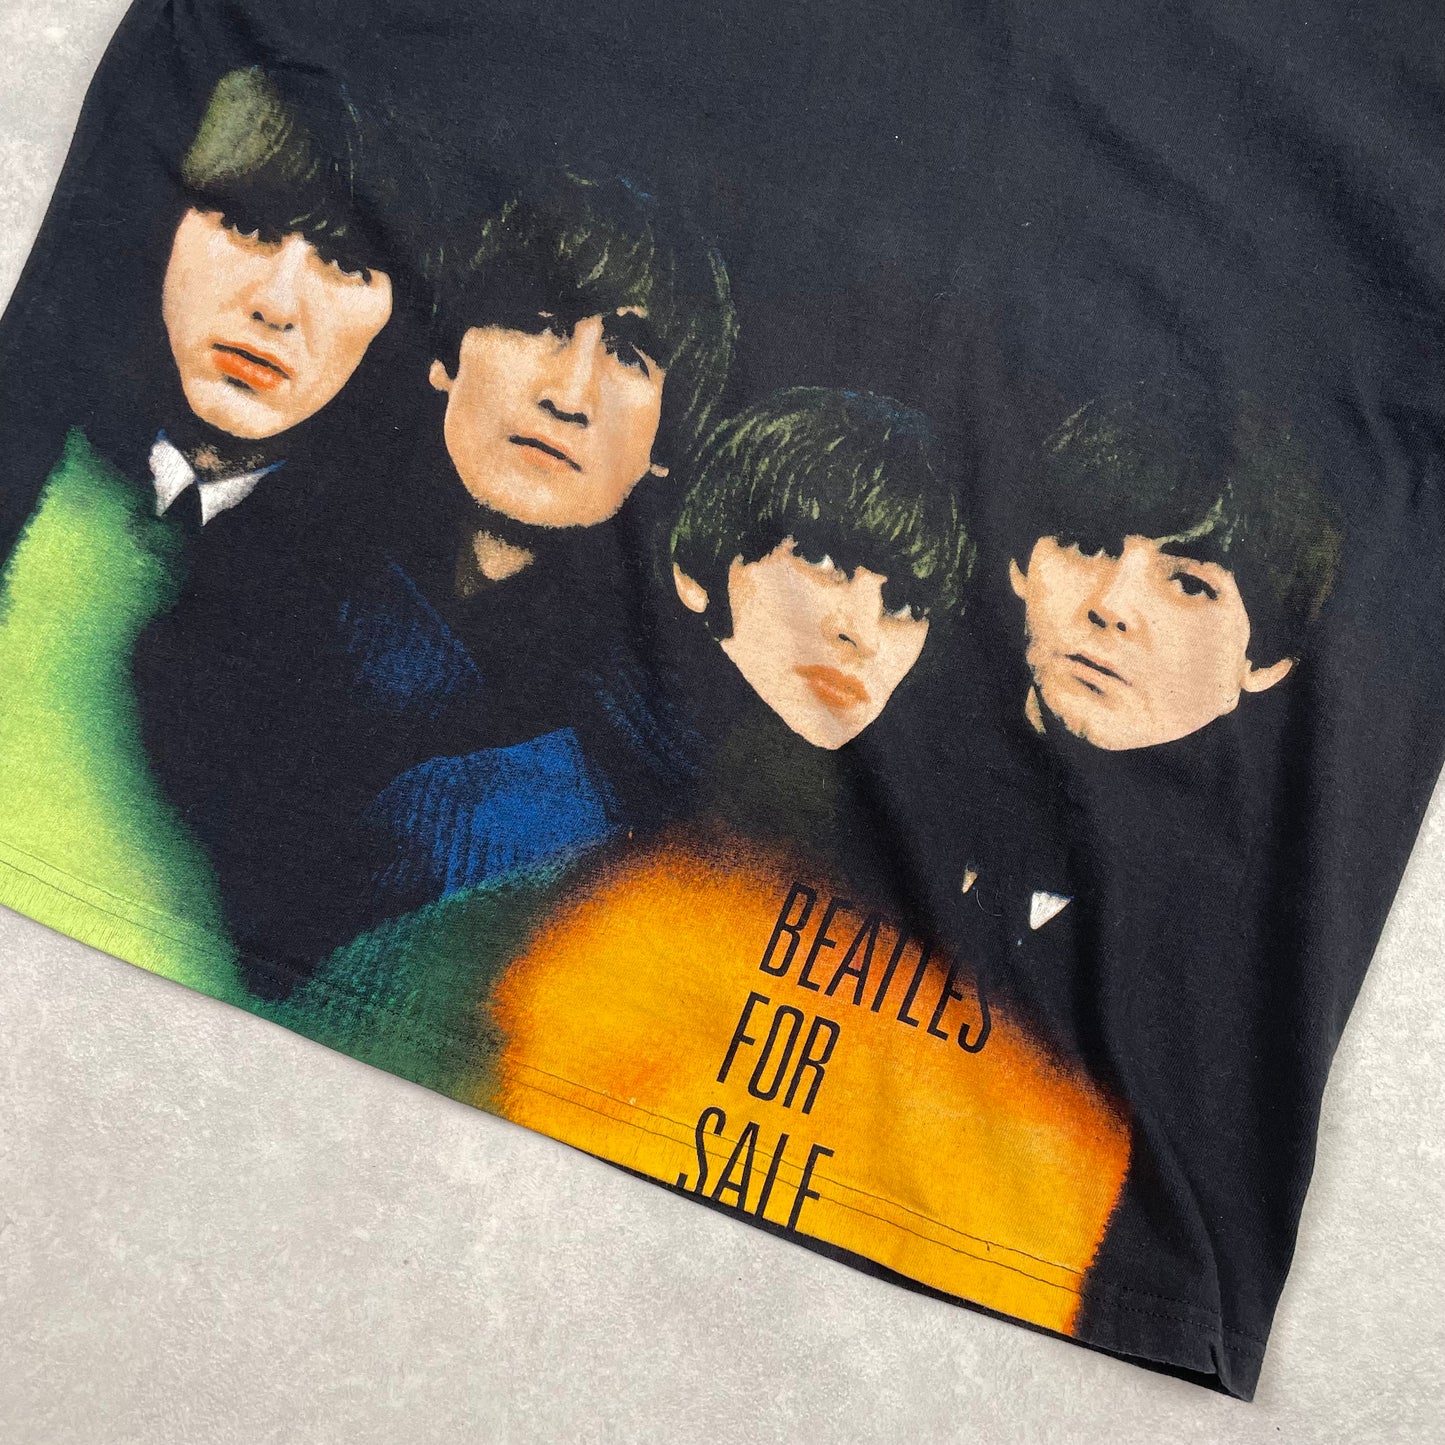 The Beatles T-Shirt 2009 “Beatles for Sale” Black Fruit of the Loom Heavy